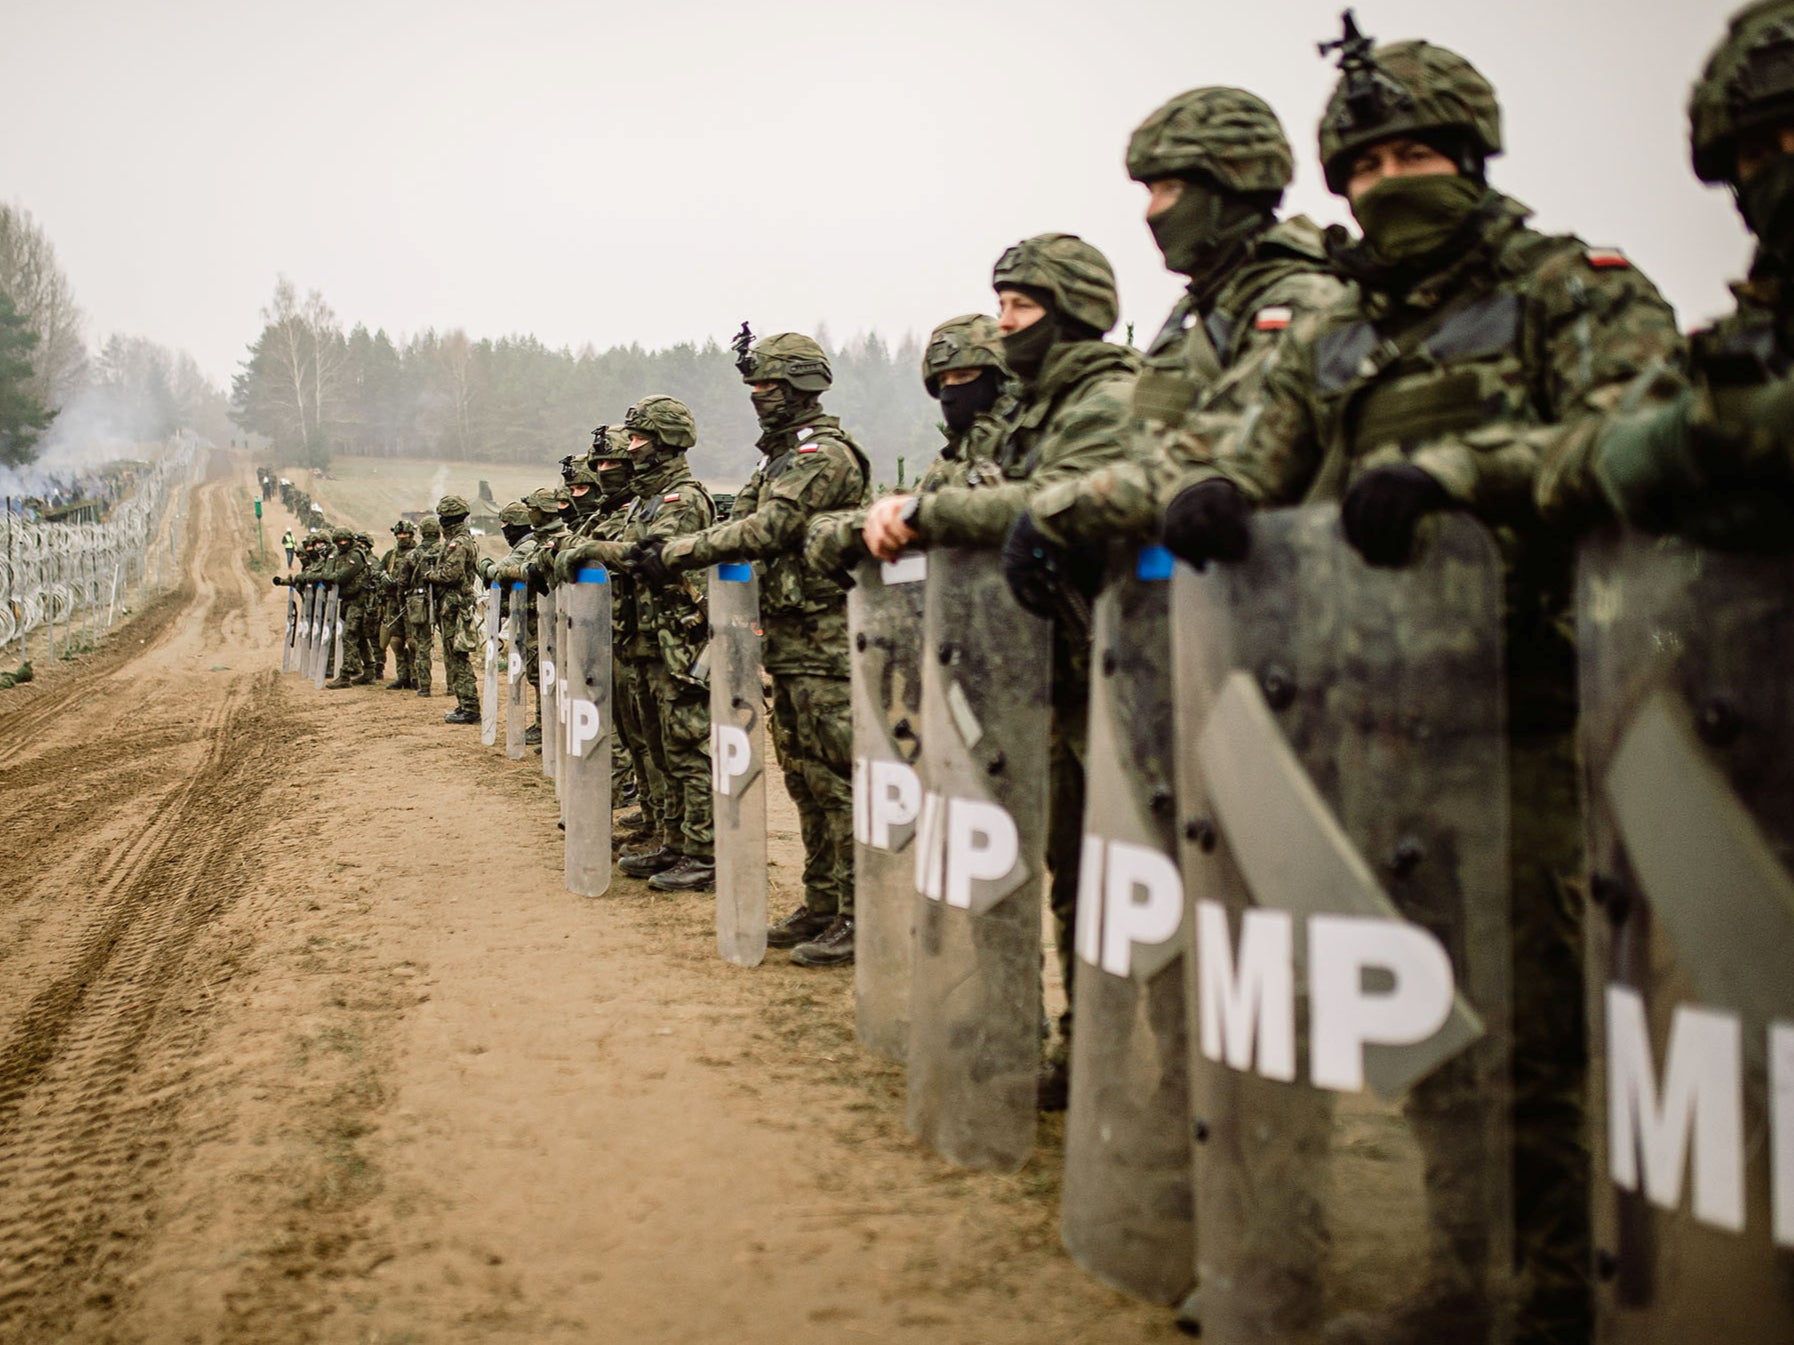 Polish military police guard their country’s side of the border with Belarus